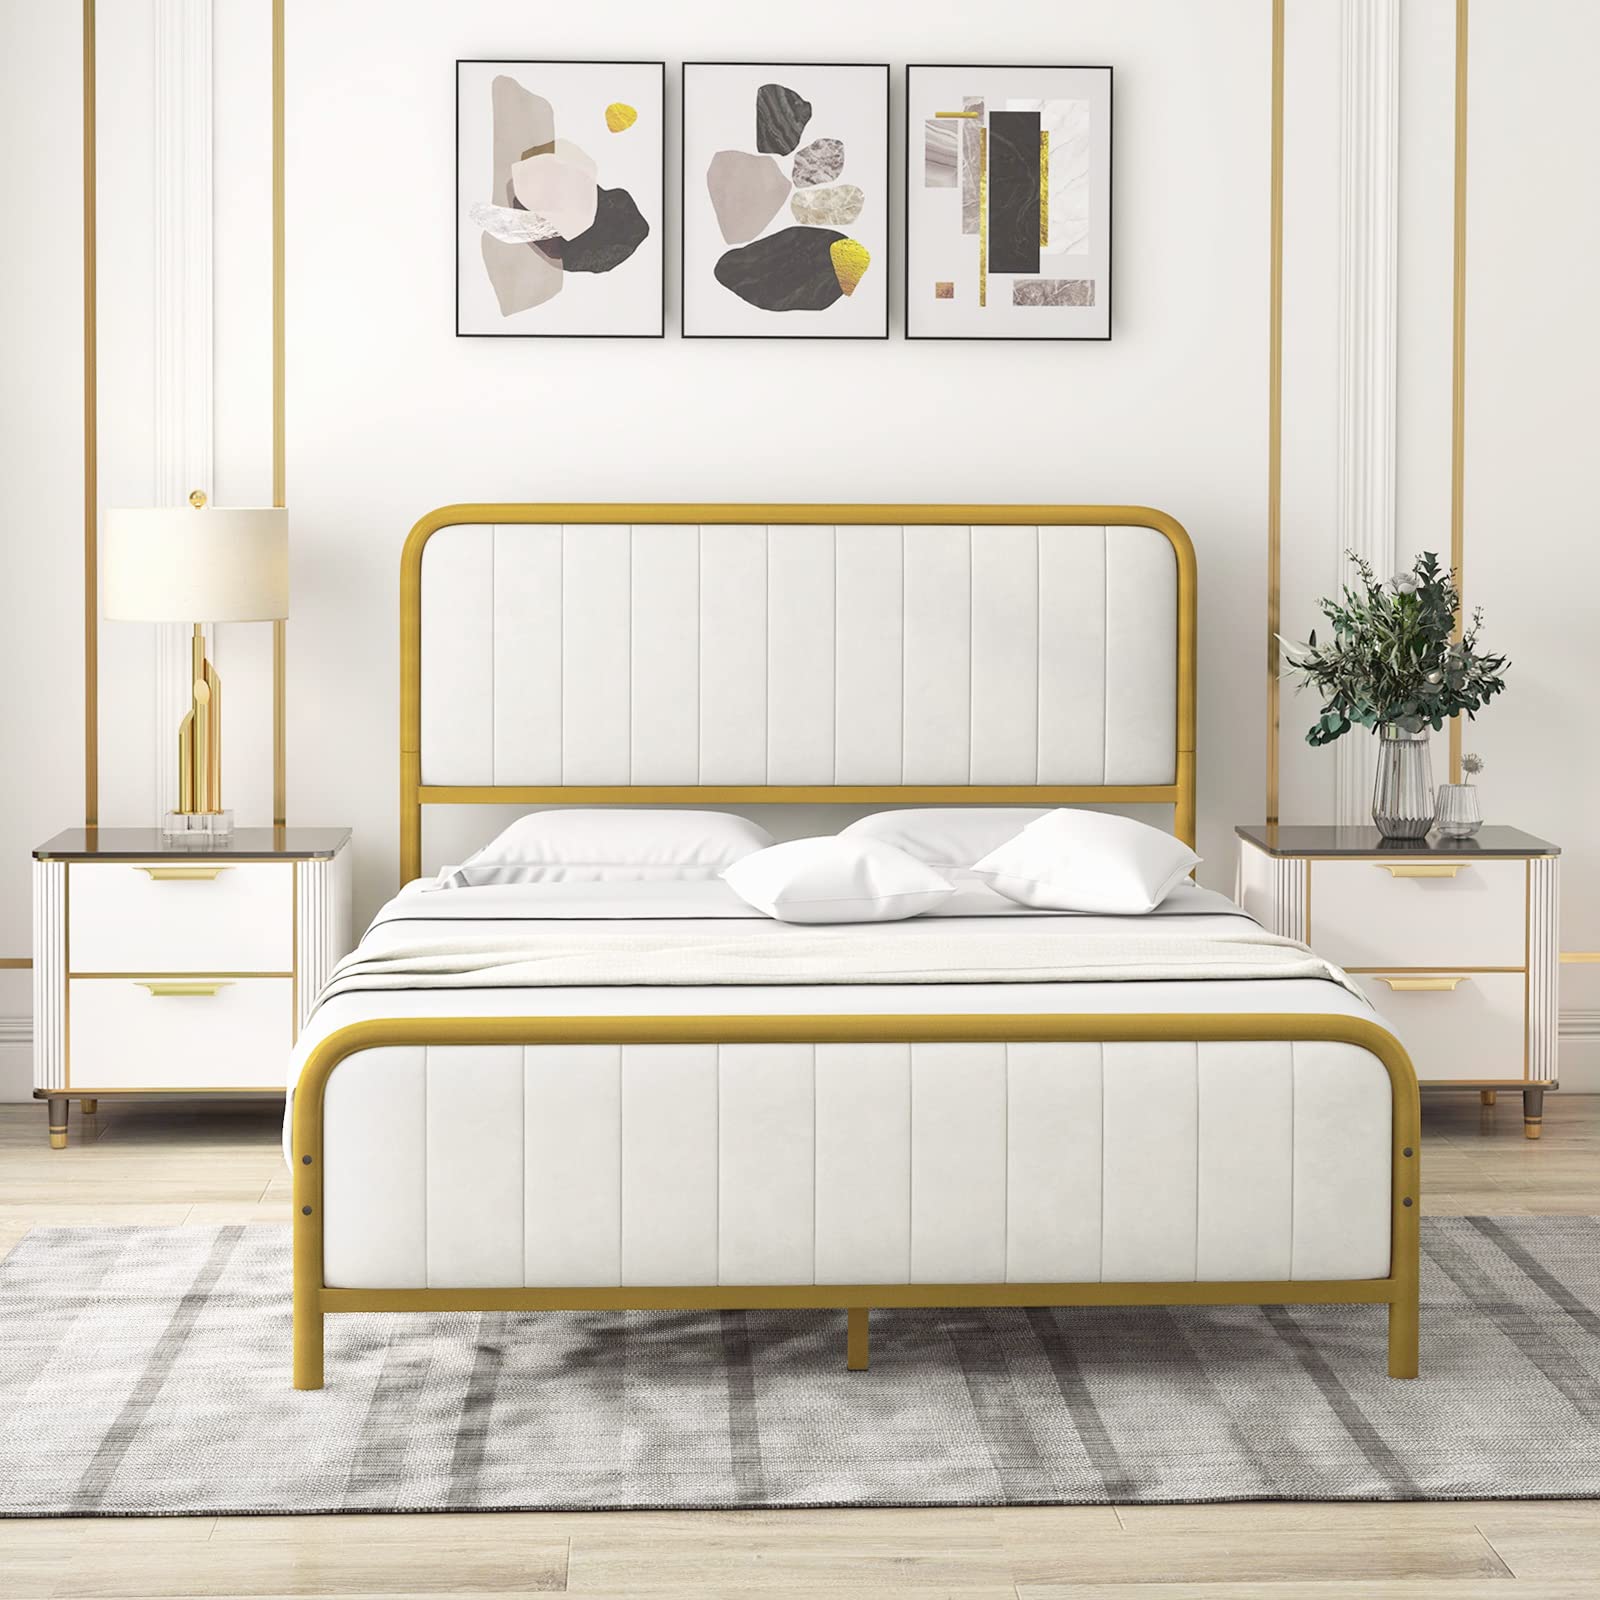 Giantex Twin Size Gold Bed Frame with Velvet Headboard and Footboard, Heavy-duty Metal Slats Support Mattress Foundation